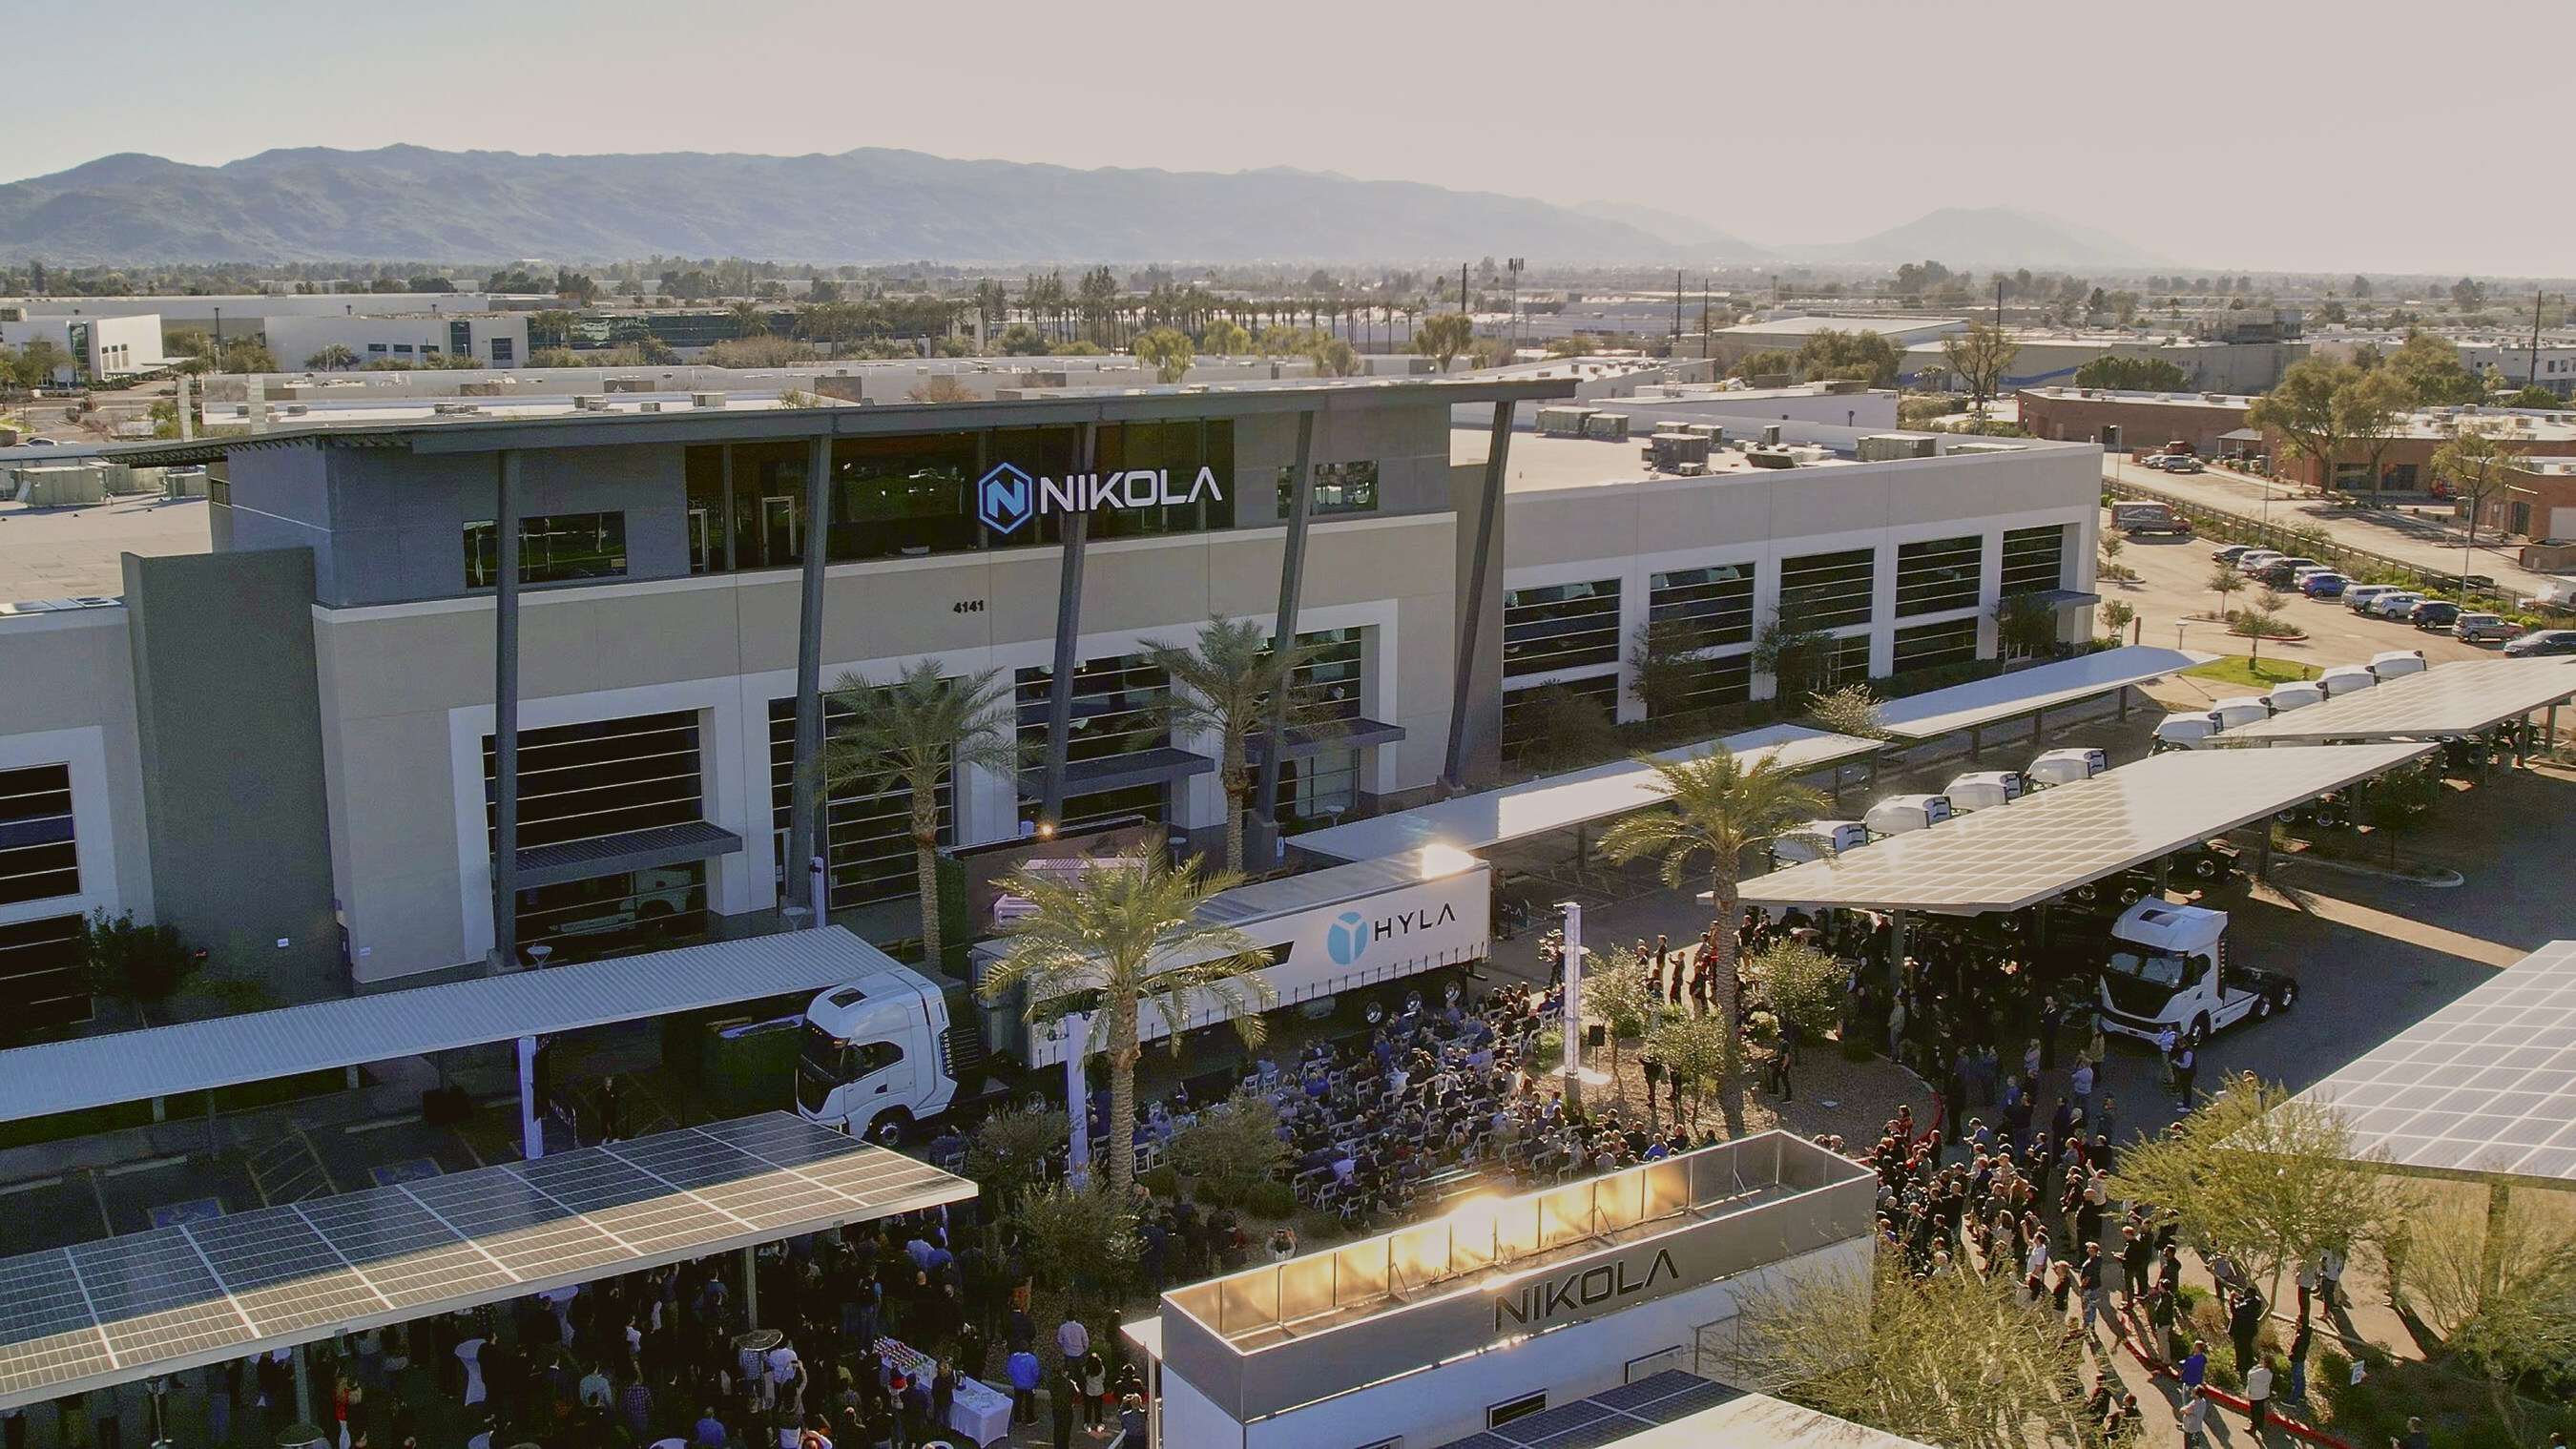 More than 300 fleet, government, supplier, energy and media representatives were on site on January 25, 2023 for the announcement of the HYLA brand at Nikola’s headquarters in Phoenix.  The event highlighted the progress made by Nikola’s energy and truck businesses. On Thursday, June 1, 2023 at 4:30 p.m. ET, the company is holding a “Fireside Chat” and Q&A session for Nikola stockholders with CEO Michael Lohscheller.